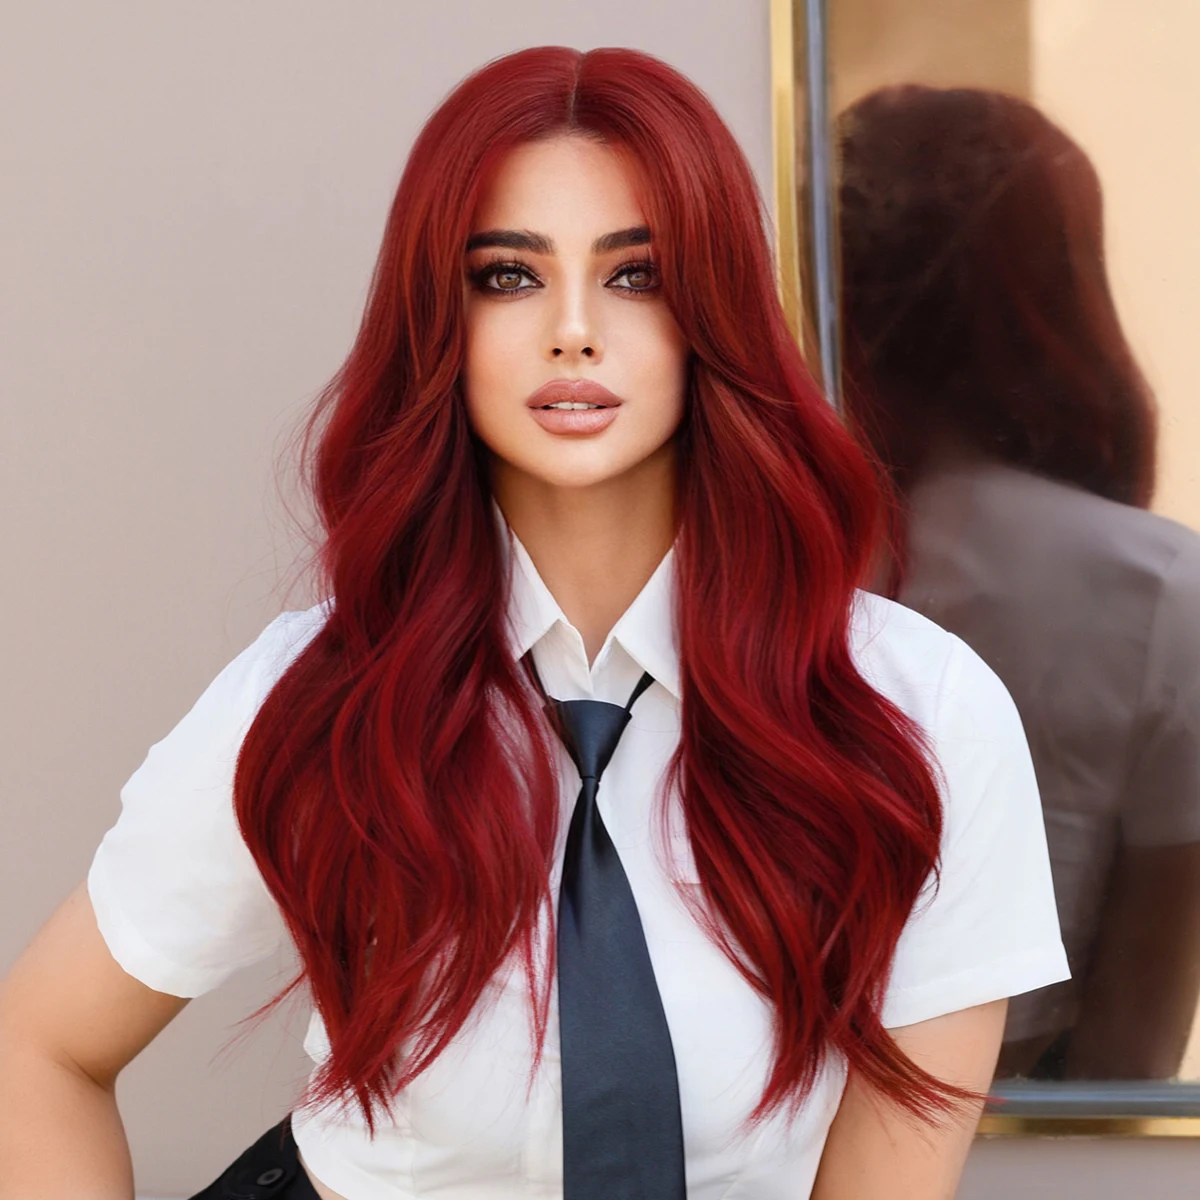 

Lace Front Wigs Long Red Wavy Wigs for Women Curly Middle Part Burgundy Wig Natural Looking Synthetic Heat Resistant Fiber Wigs